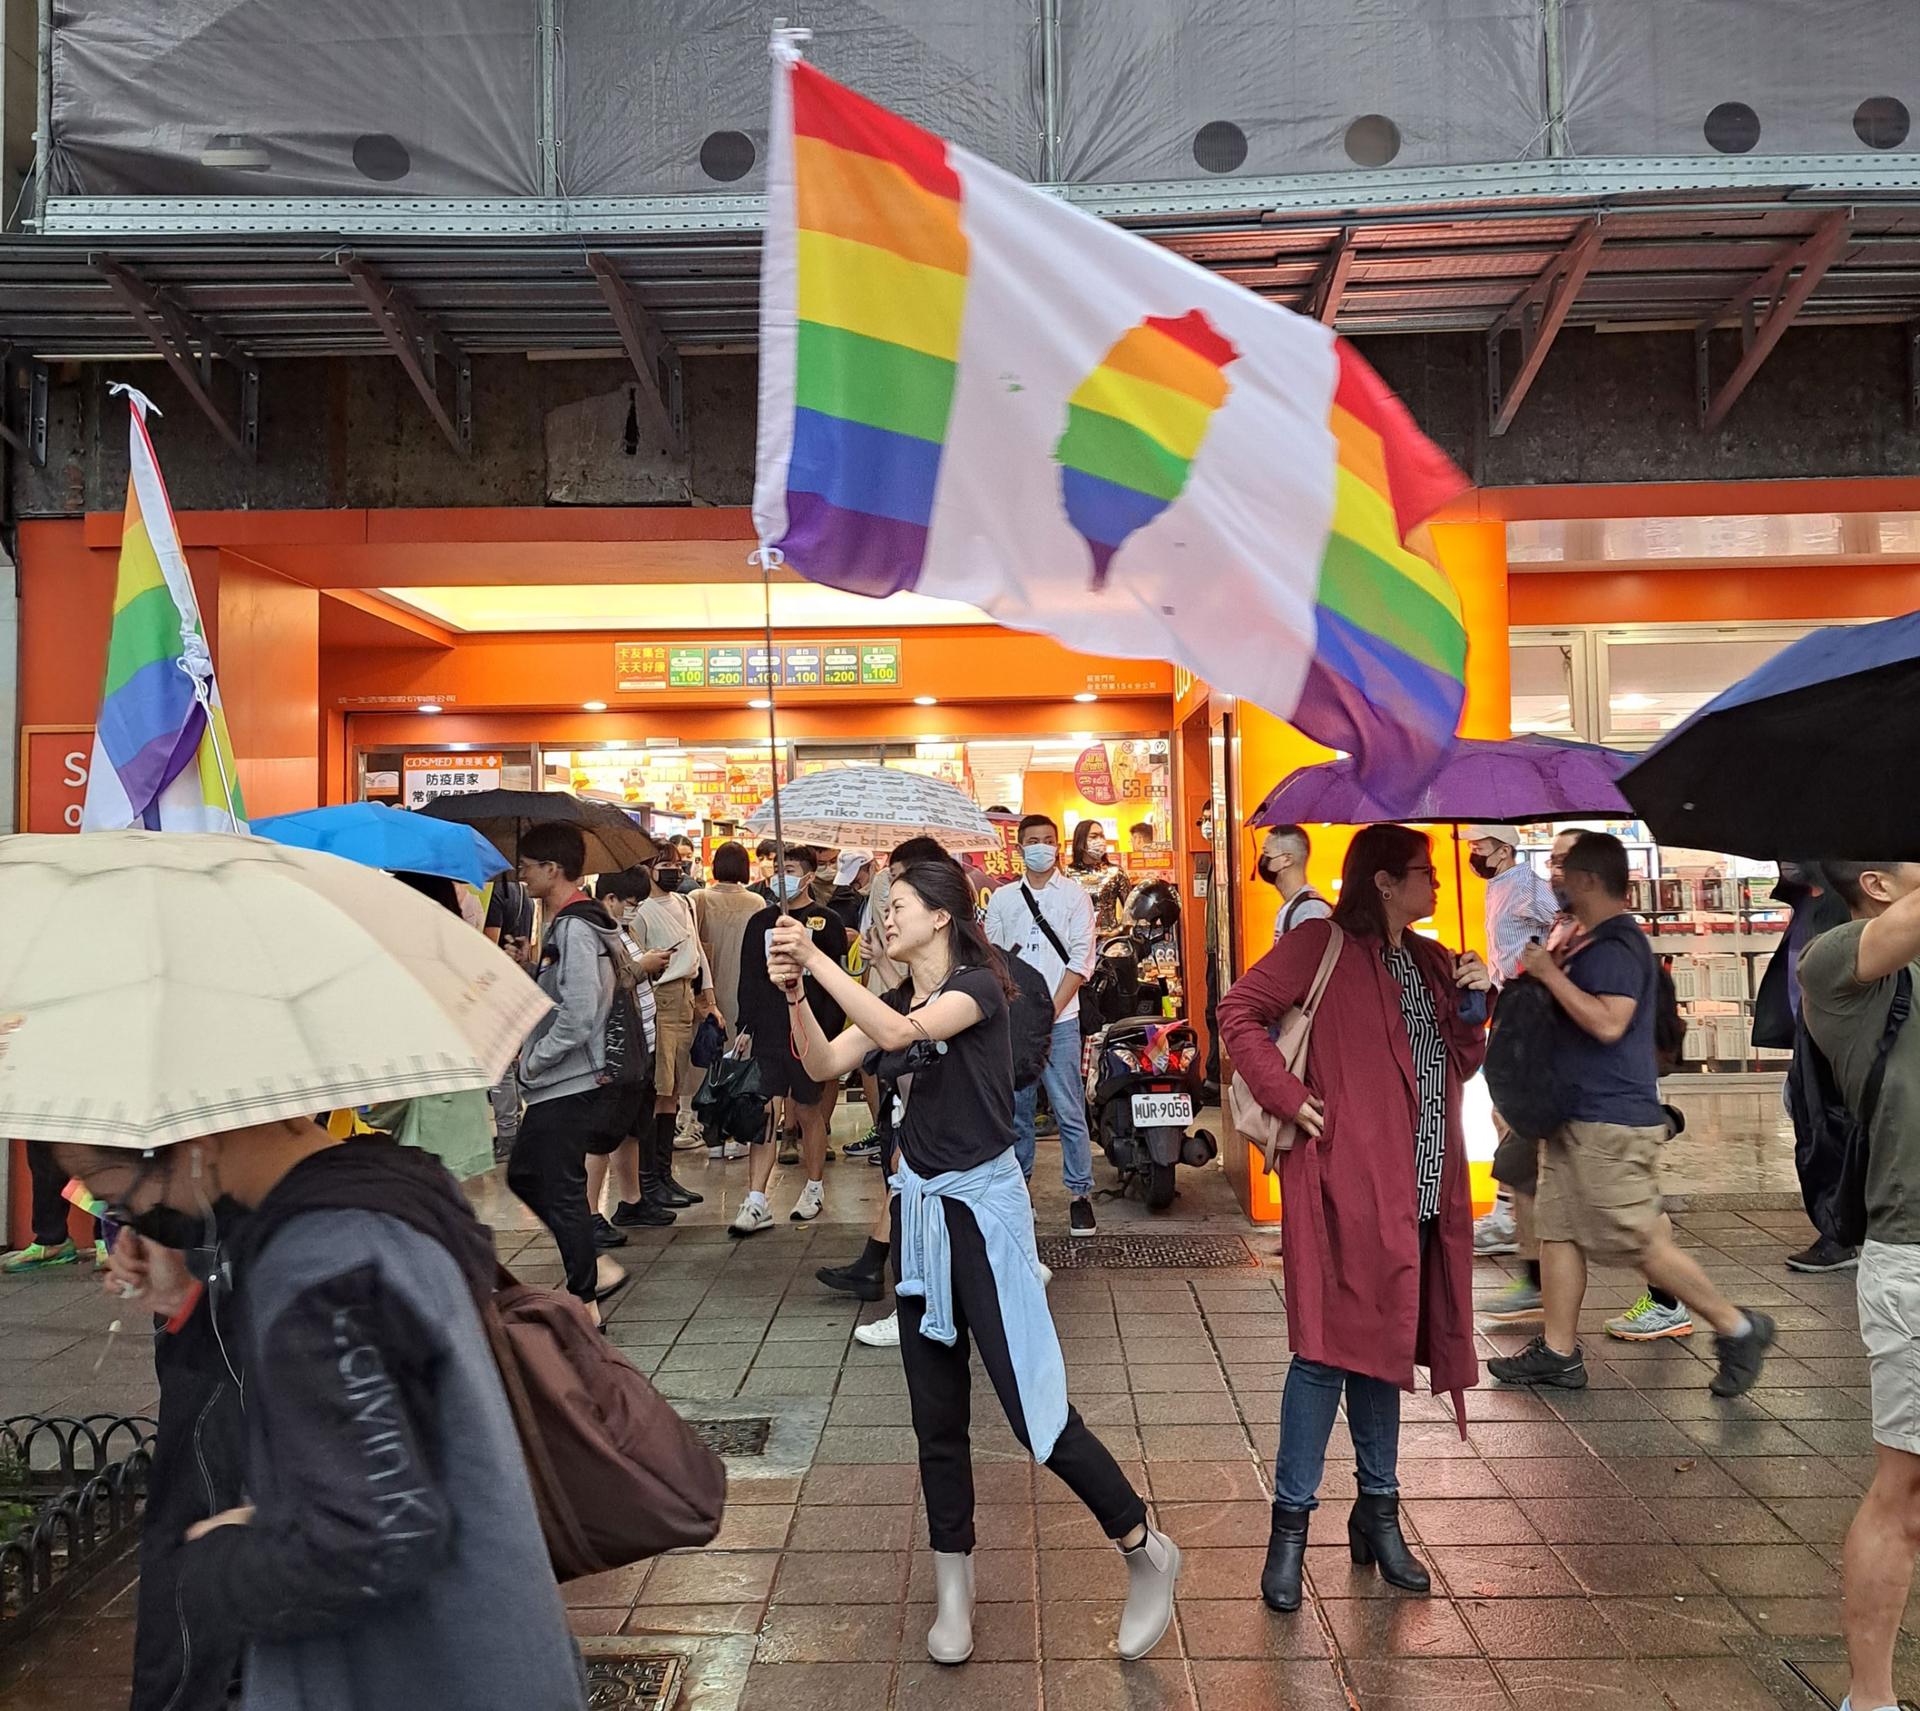 Attendees raise flags that combine symbols of Taiwanese sovereignty with rainbow Pride colors, at Taiwan's Pride celebration on Saturday, Oct. 29.